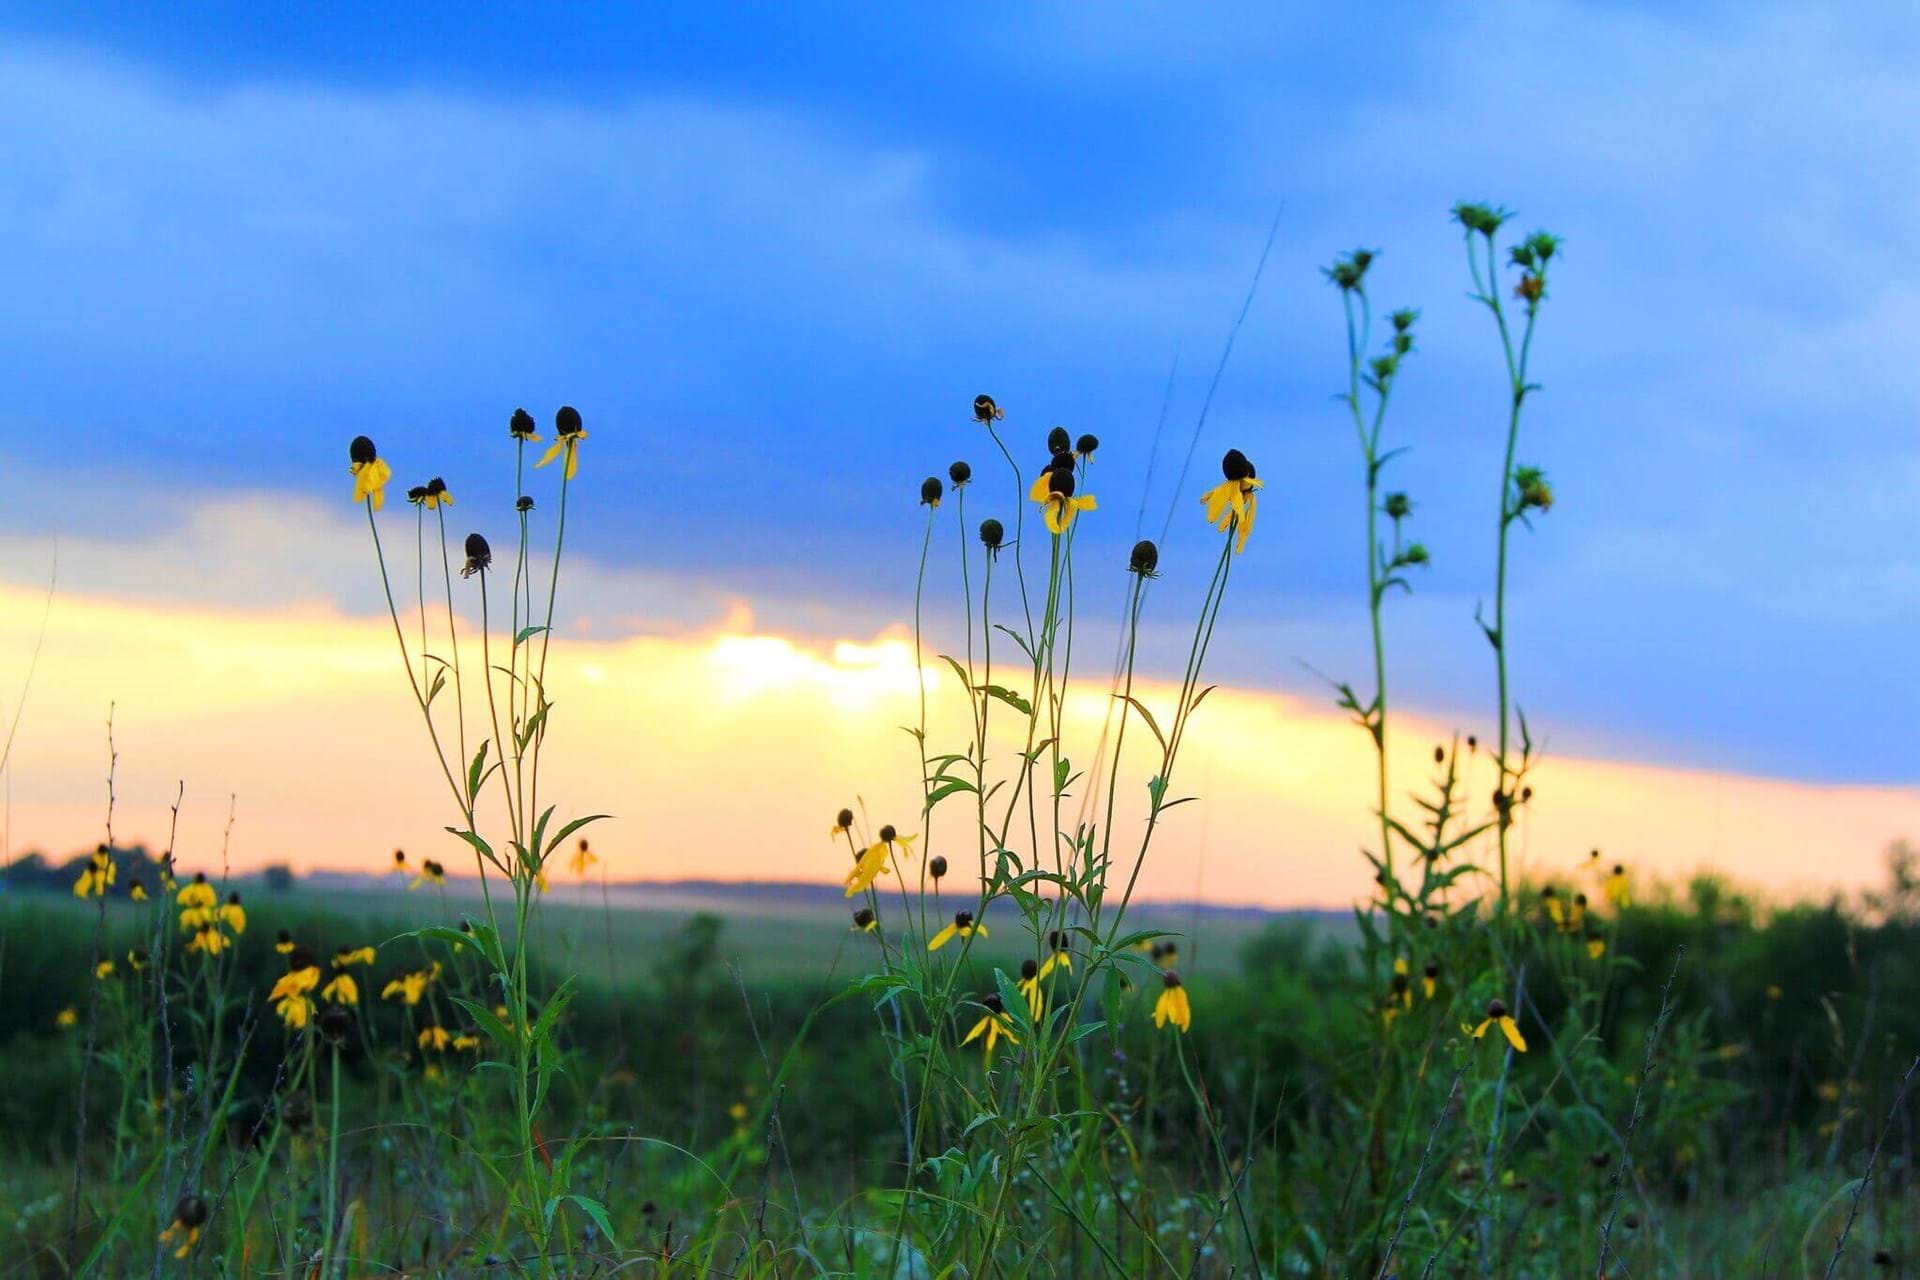 Some wildflowers peeking over the rest of the grasses during a slightly cloudy sunset